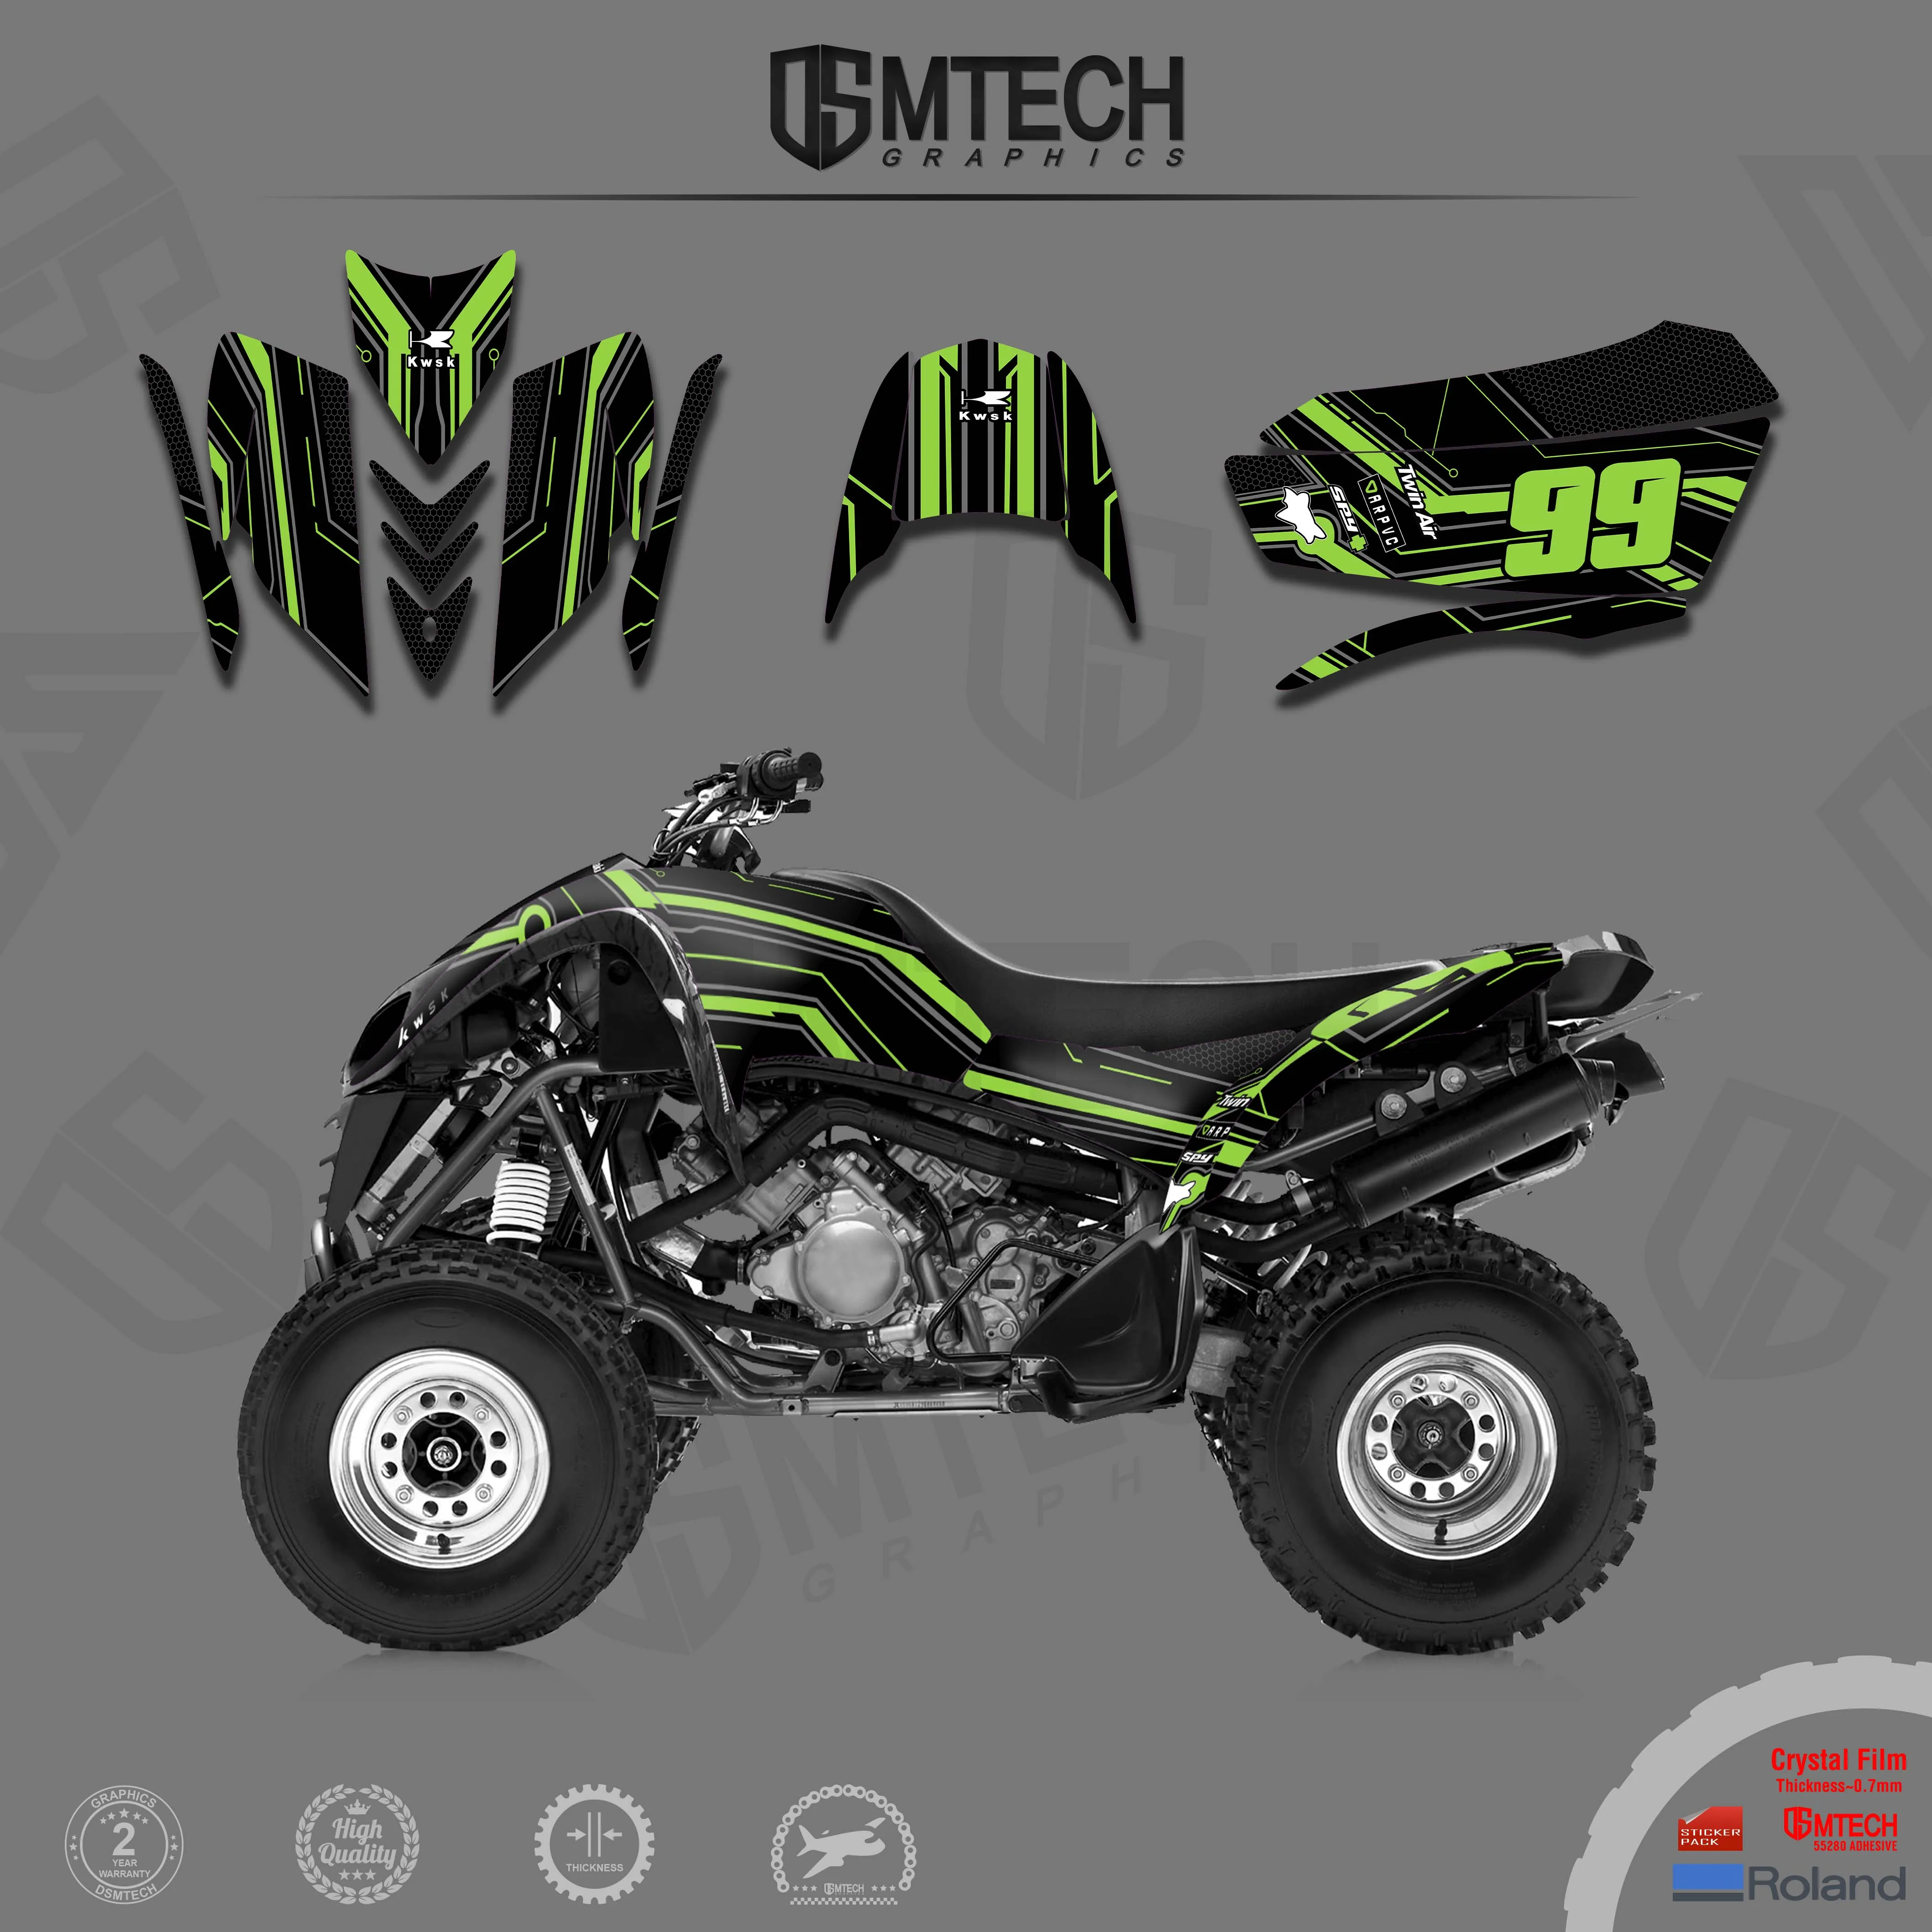 DSMTECH team motorcycle off-road sticker KFX Kawasaki  700 combination graphics kit the evening road